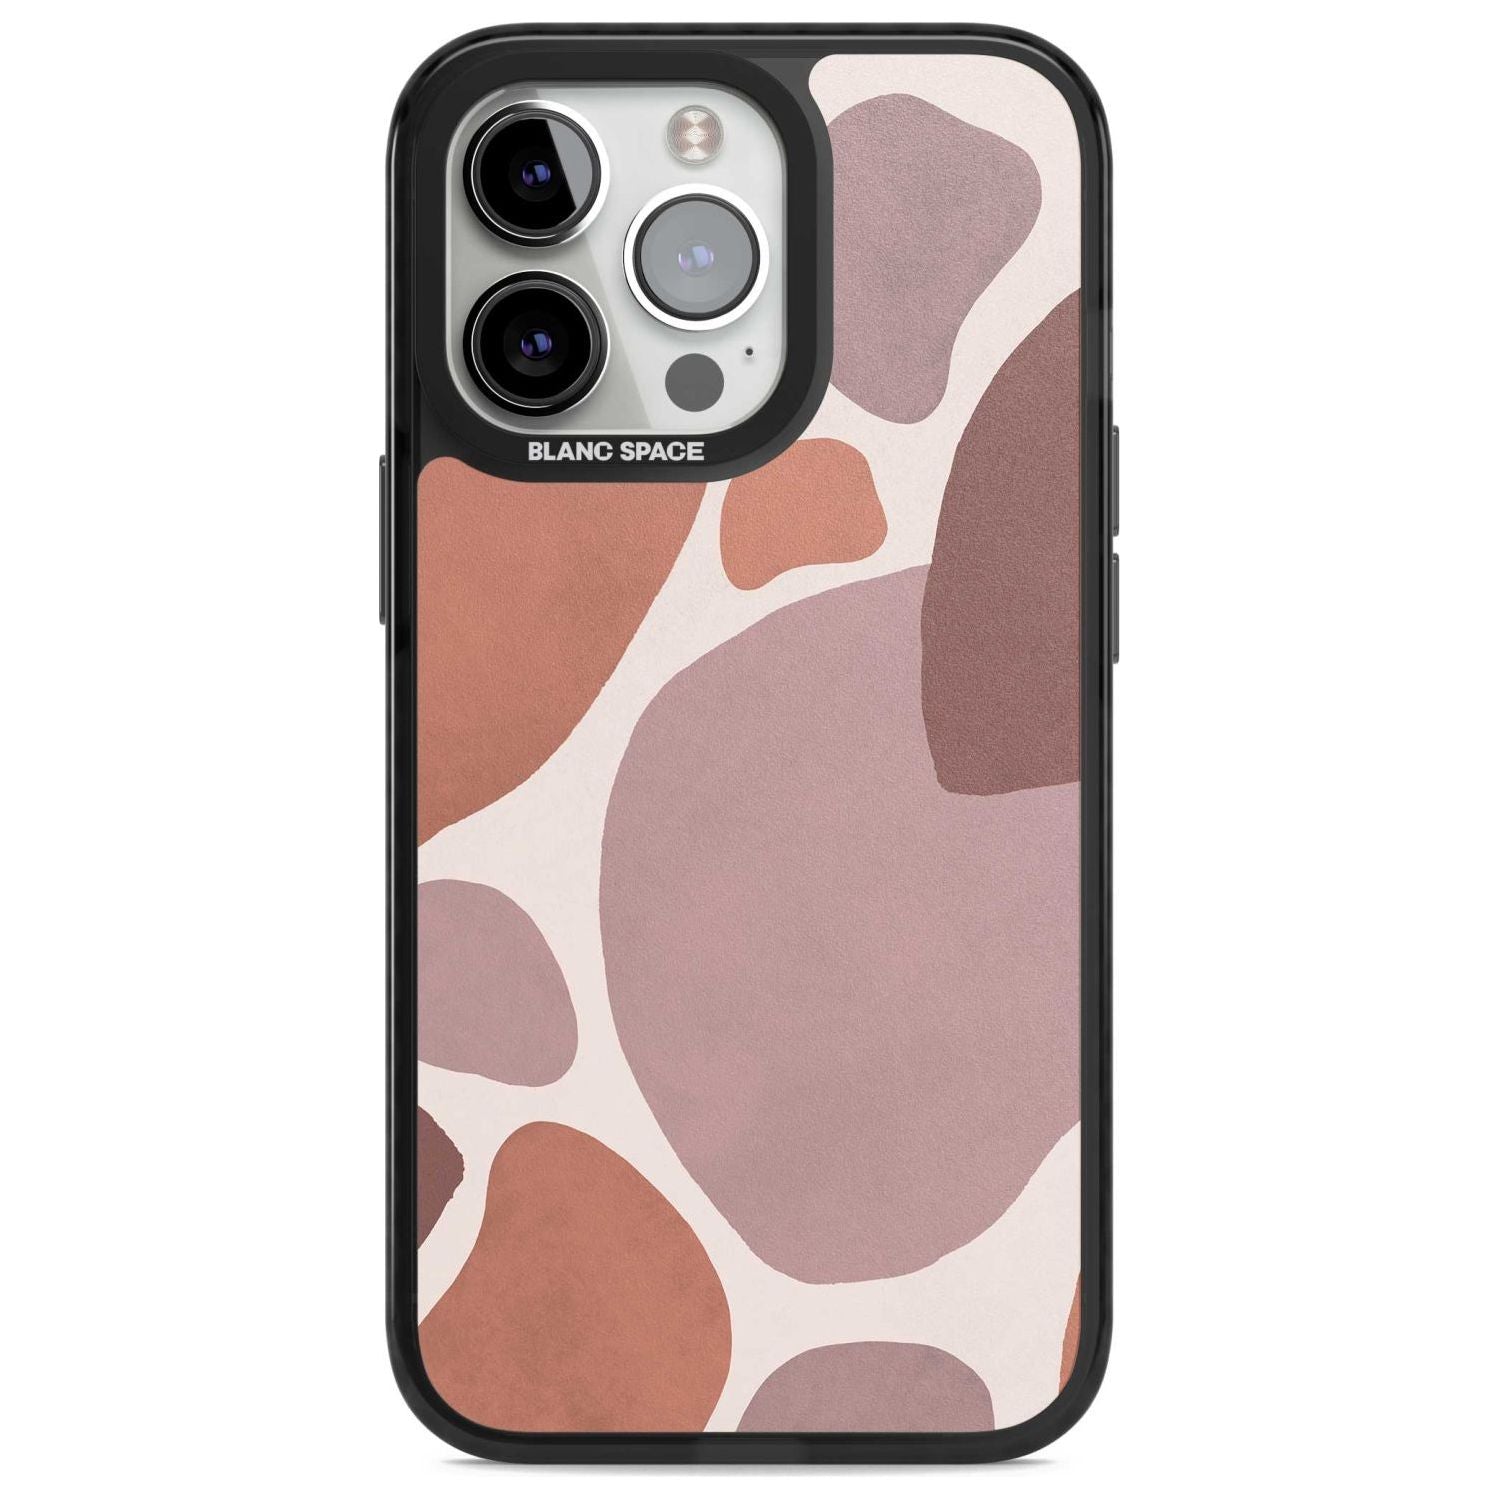 Lush Abstract Watercolour Phone Case iPhone 15 Pro Max / Magsafe Black Impact Case,iPhone 15 Pro / Magsafe Black Impact Case,iPhone 14 Pro Max / Magsafe Black Impact Case,iPhone 14 Pro / Magsafe Black Impact Case,iPhone 13 Pro / Magsafe Black Impact Case Blanc Space